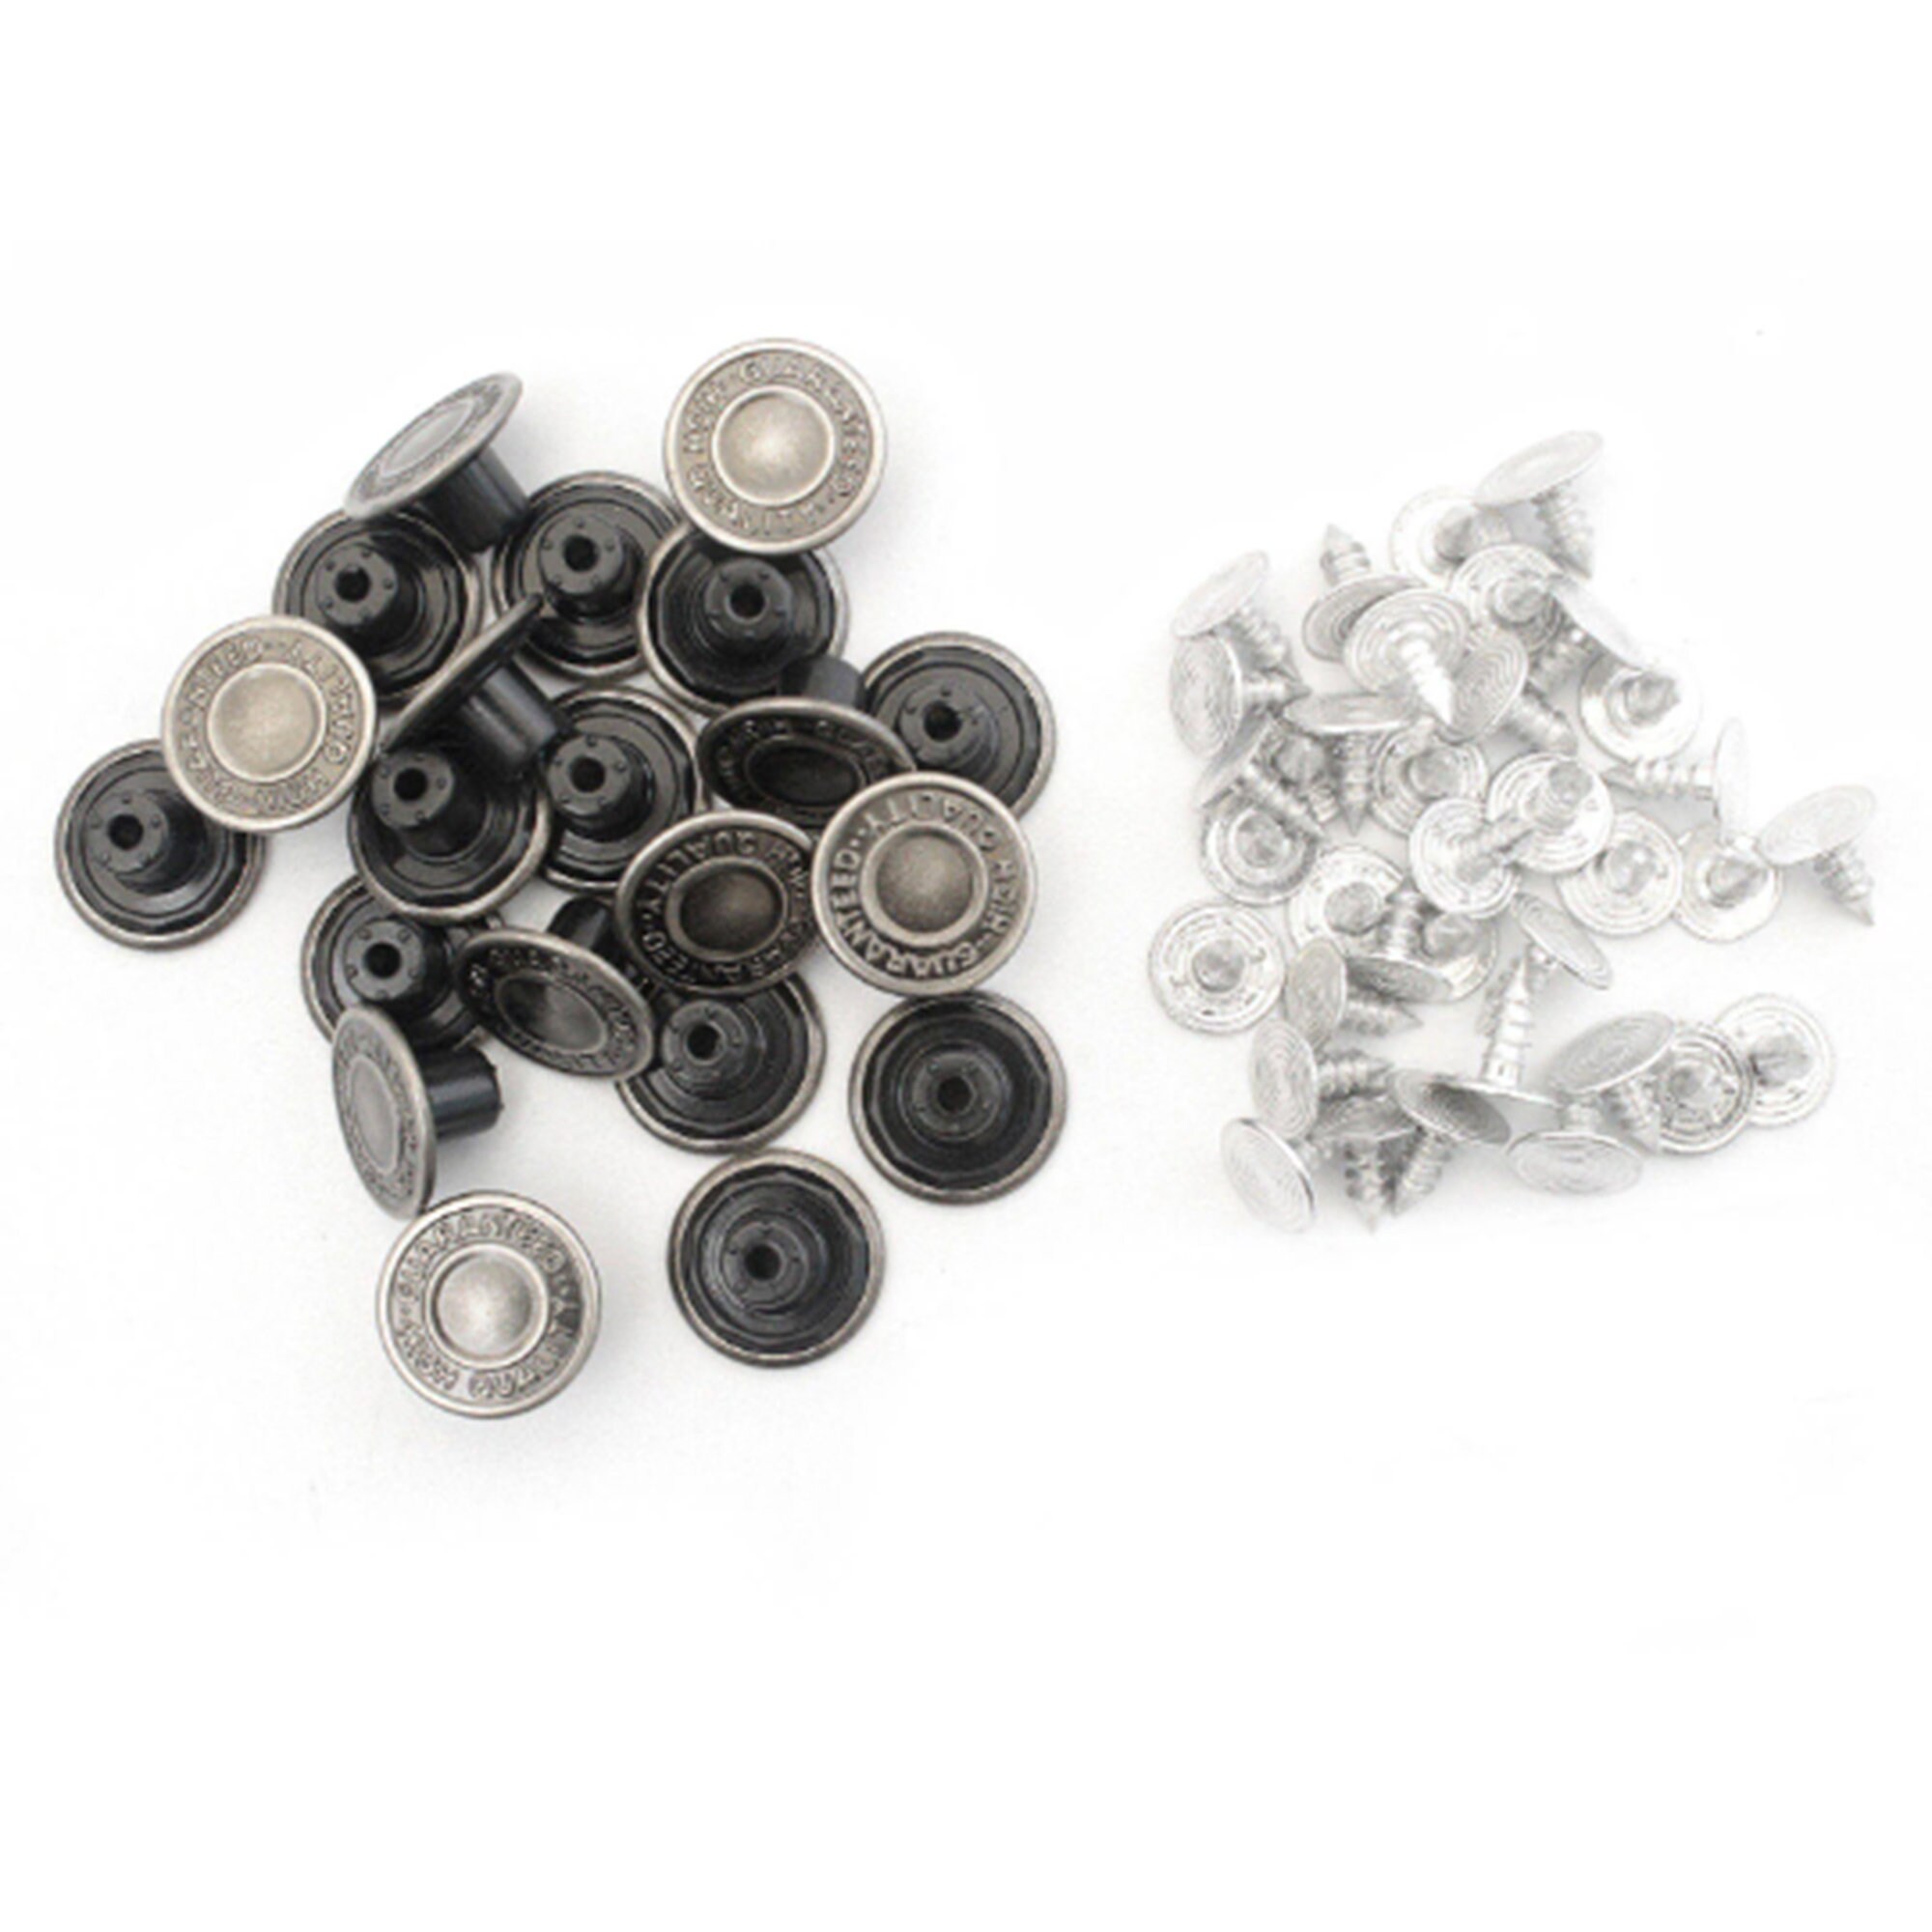 14mm Metal Jeans Buttons With Pins, Replacement Jean Jacket Buttons for  Jackets, Clothes, Trousers, Sewing Knitting Crafts, Embellishments 